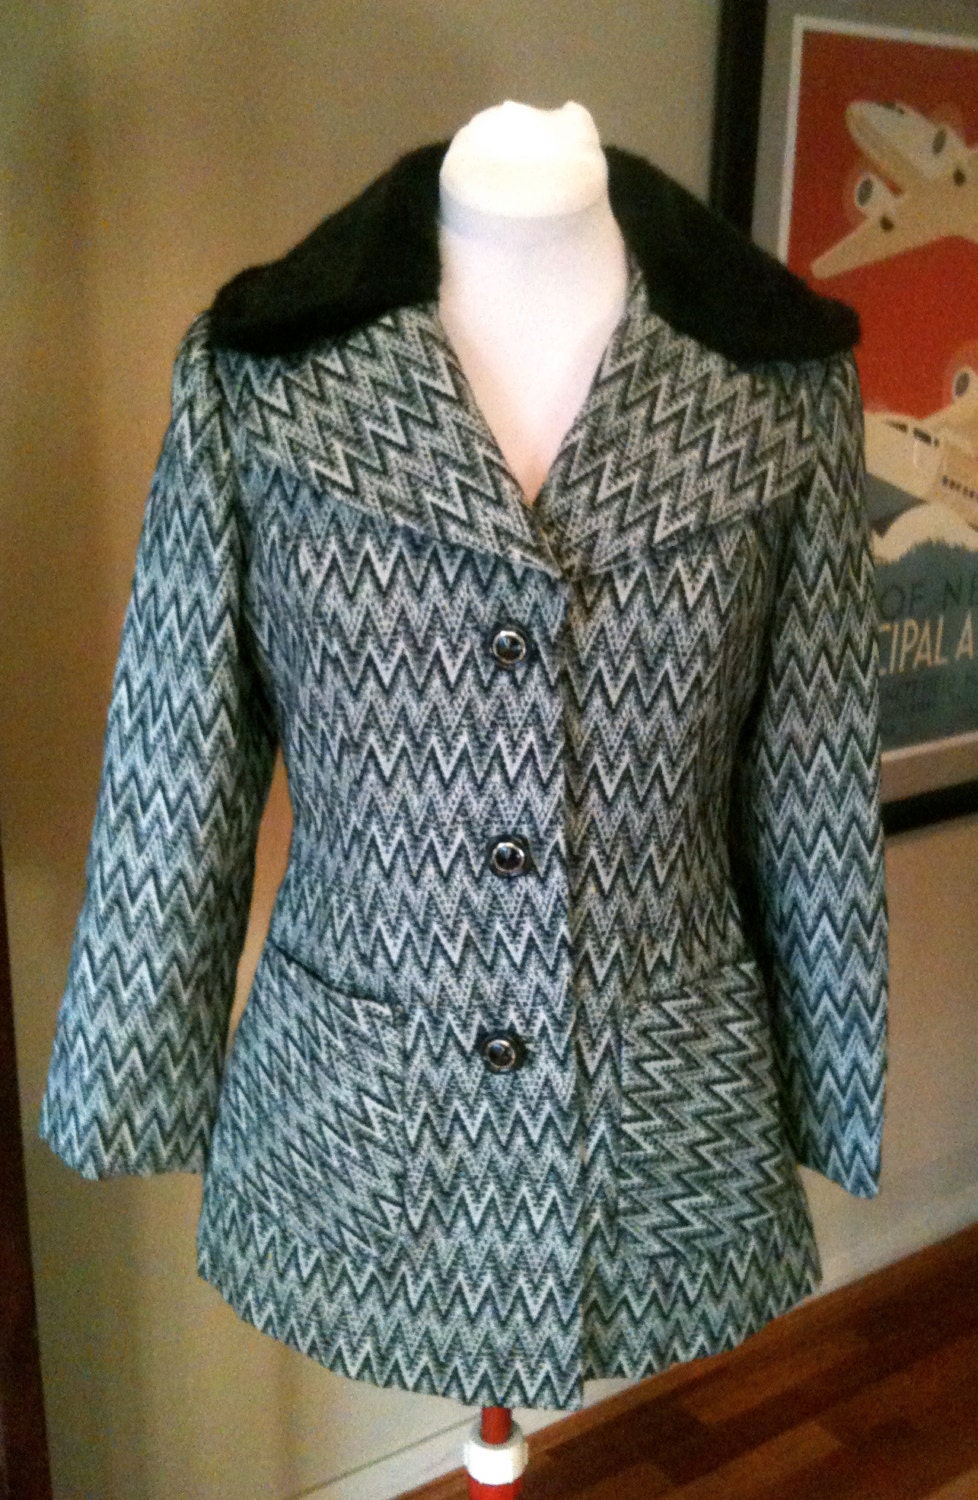 Vintage 1960s Jersey Wool Jacket with Faux Fur Collar - L